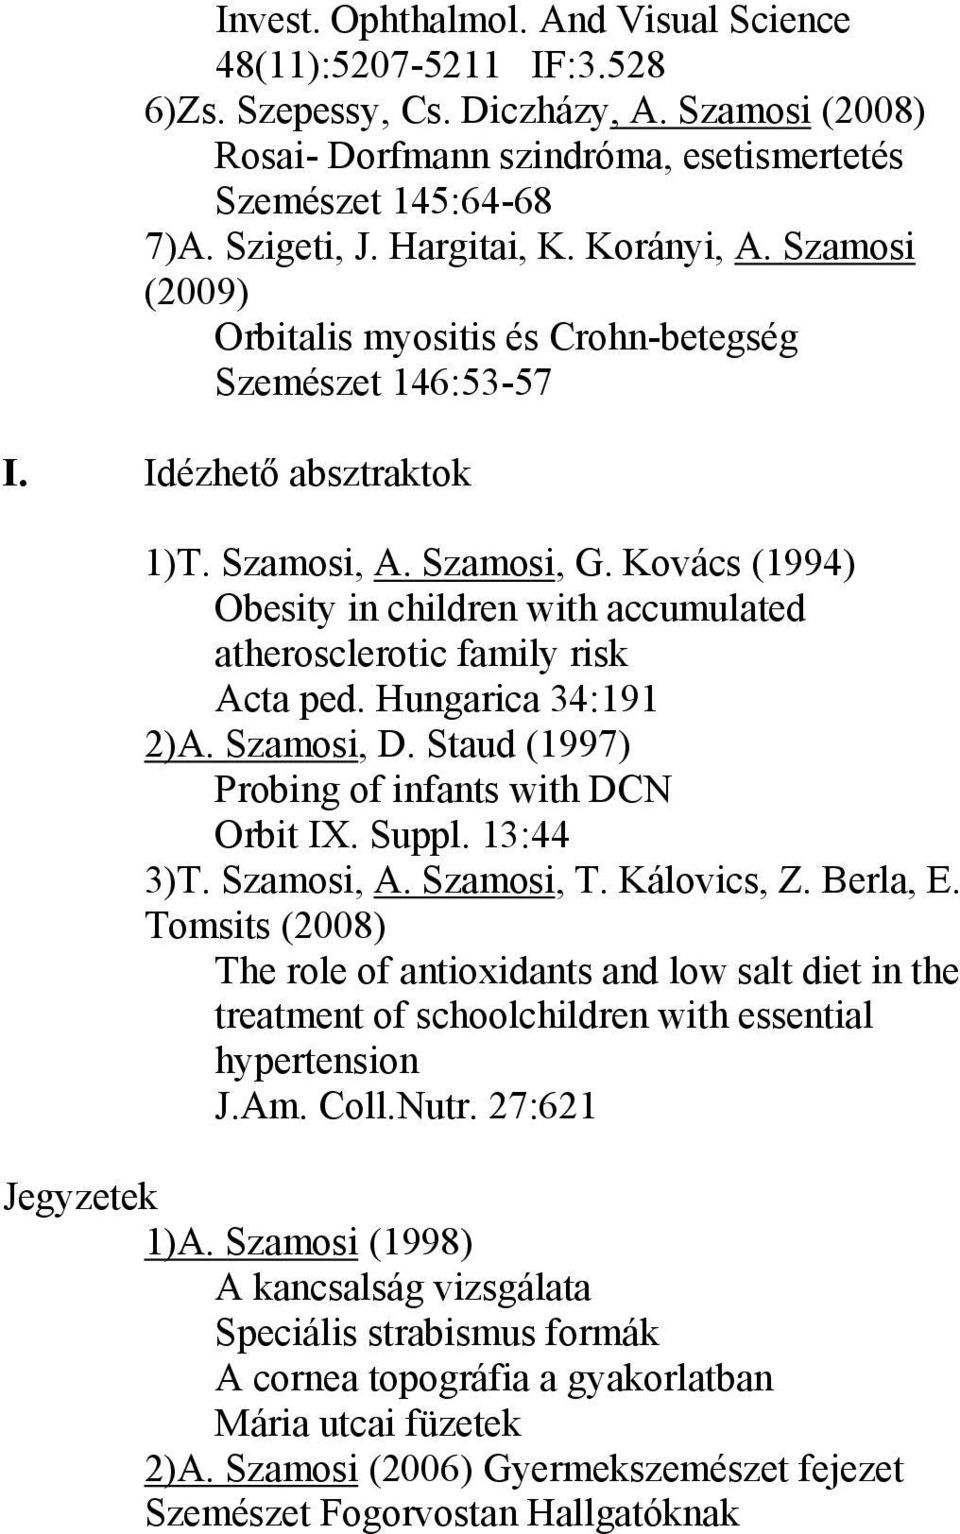 Kovács (1994) Obesity in children with accumulated atherosclerotic family risk Acta ped. Hungarica 34:191 2)A. Szamosi, D. Staud (1997) Probing of infants with DCN Orbit IX. Suppl. 13:44 3)T.